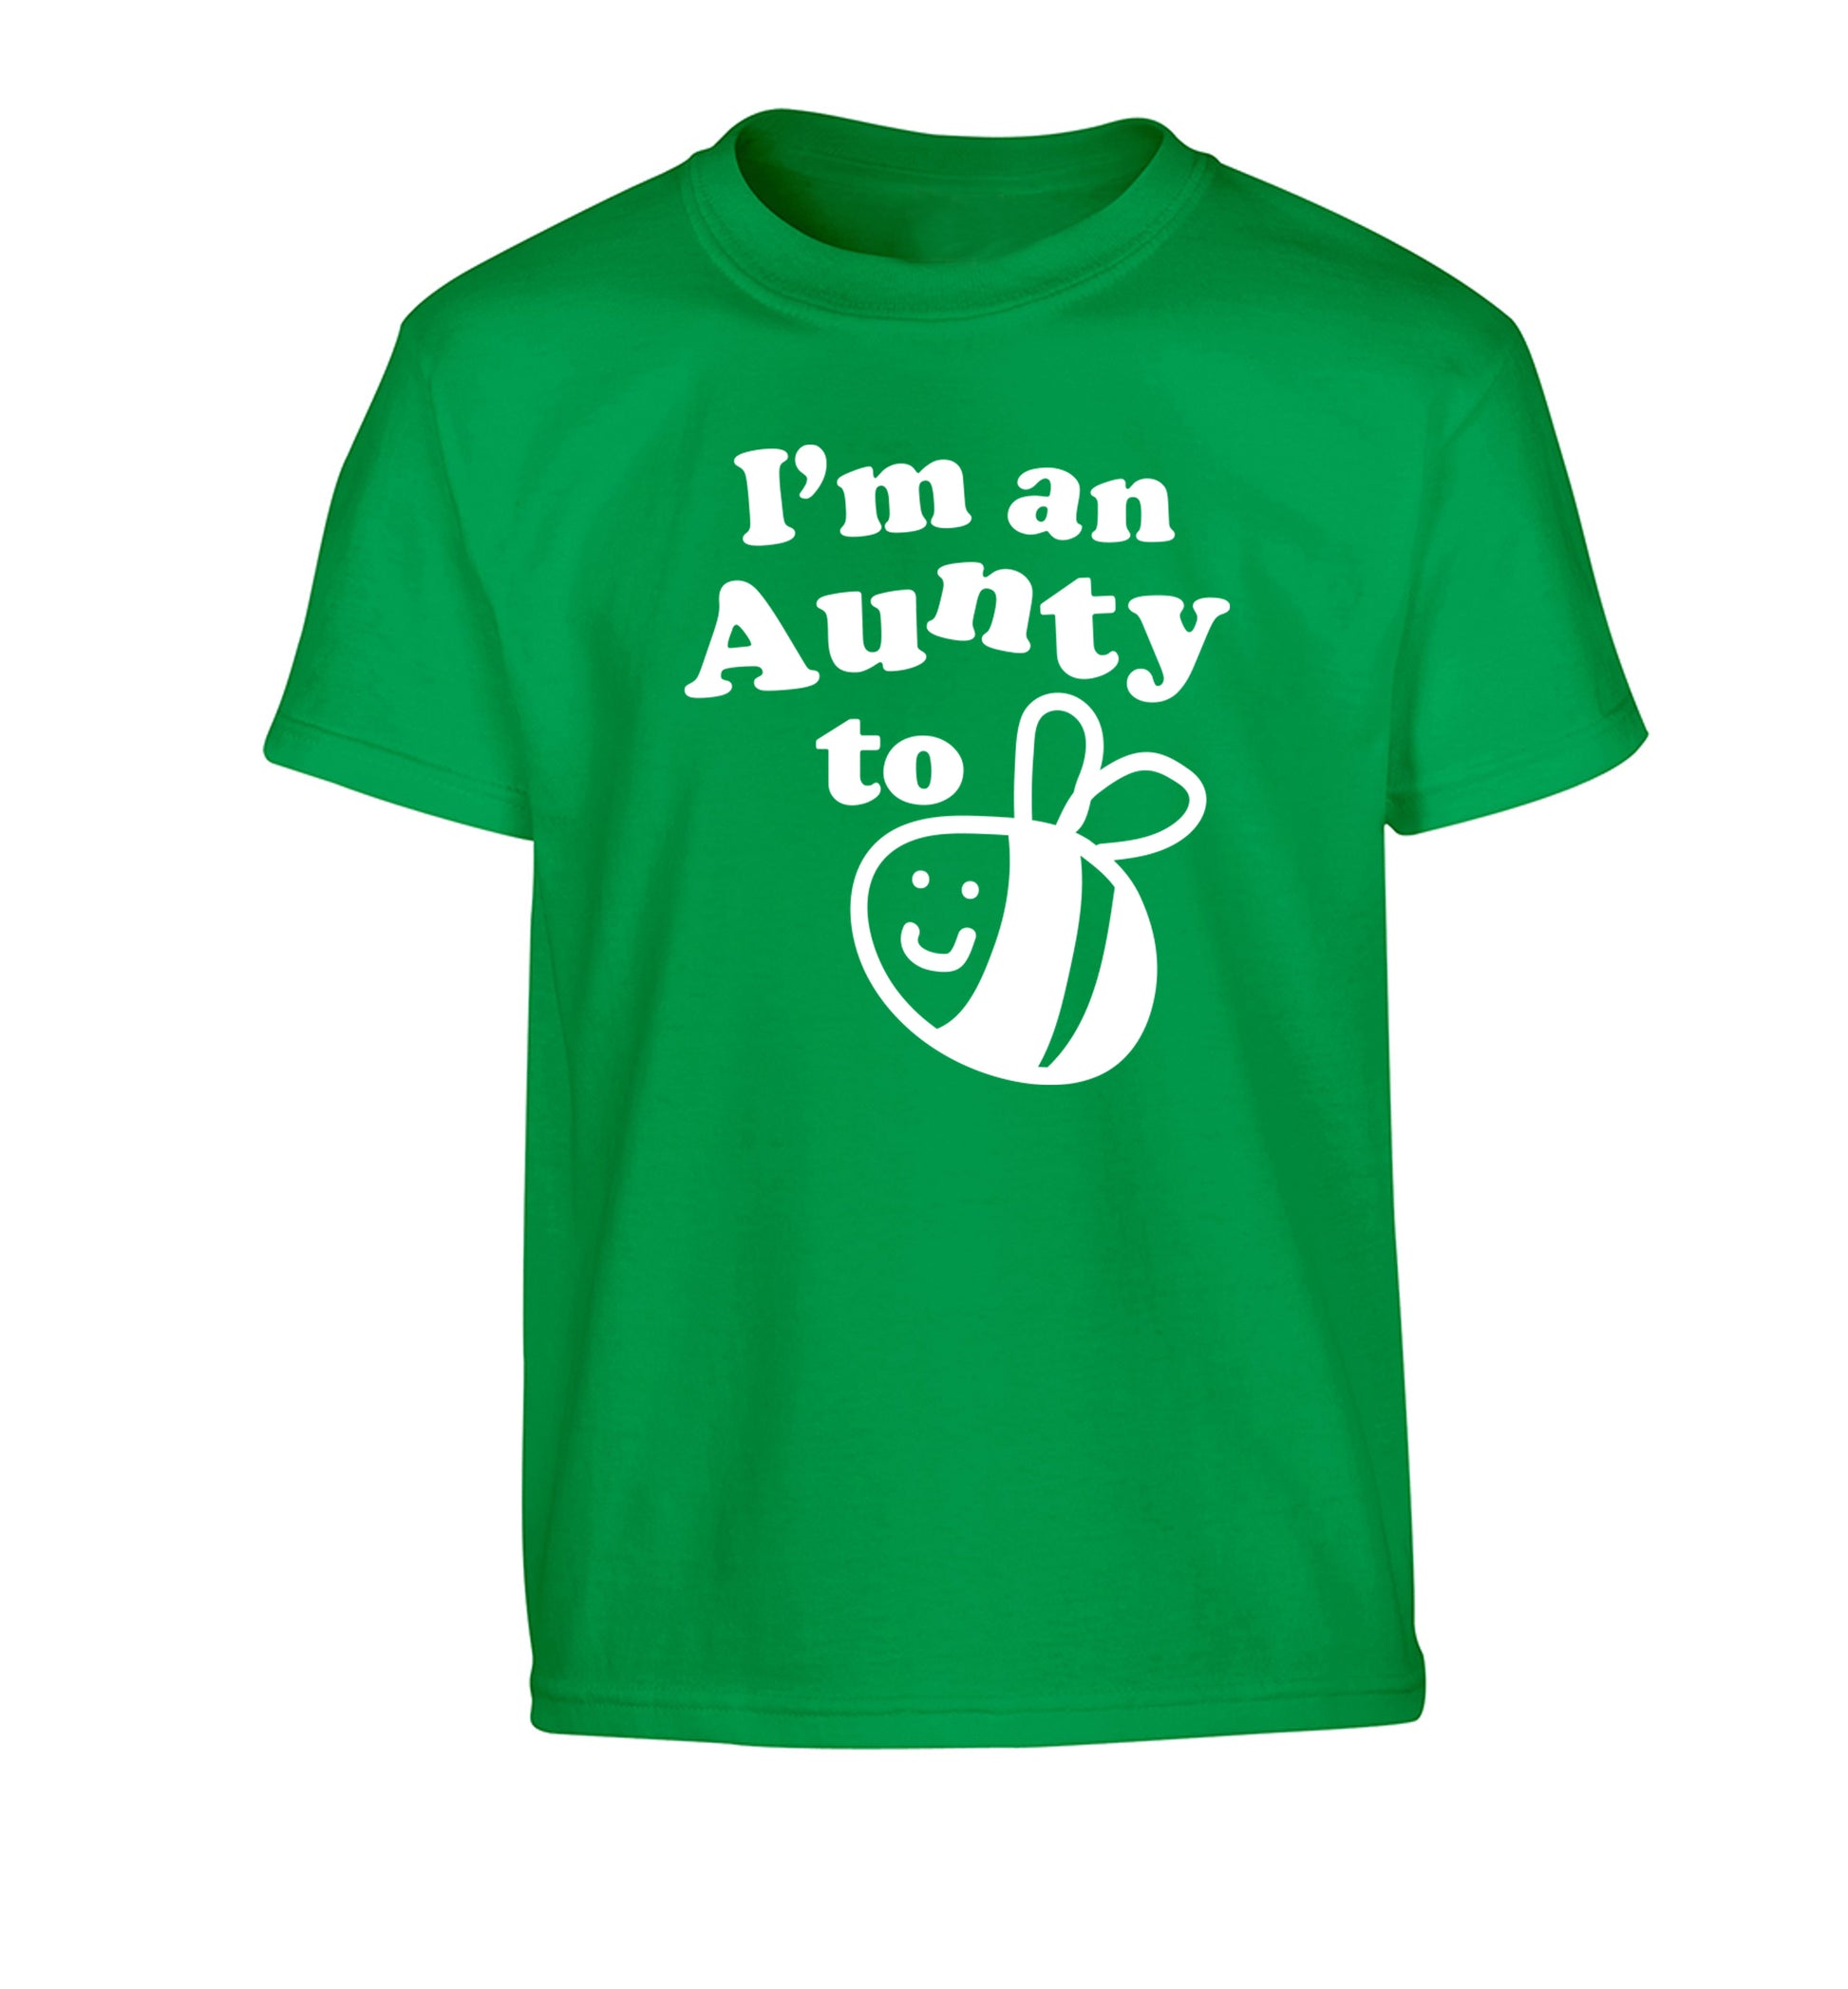 I'm an aunty to be Children's green Tshirt 12-14 Years